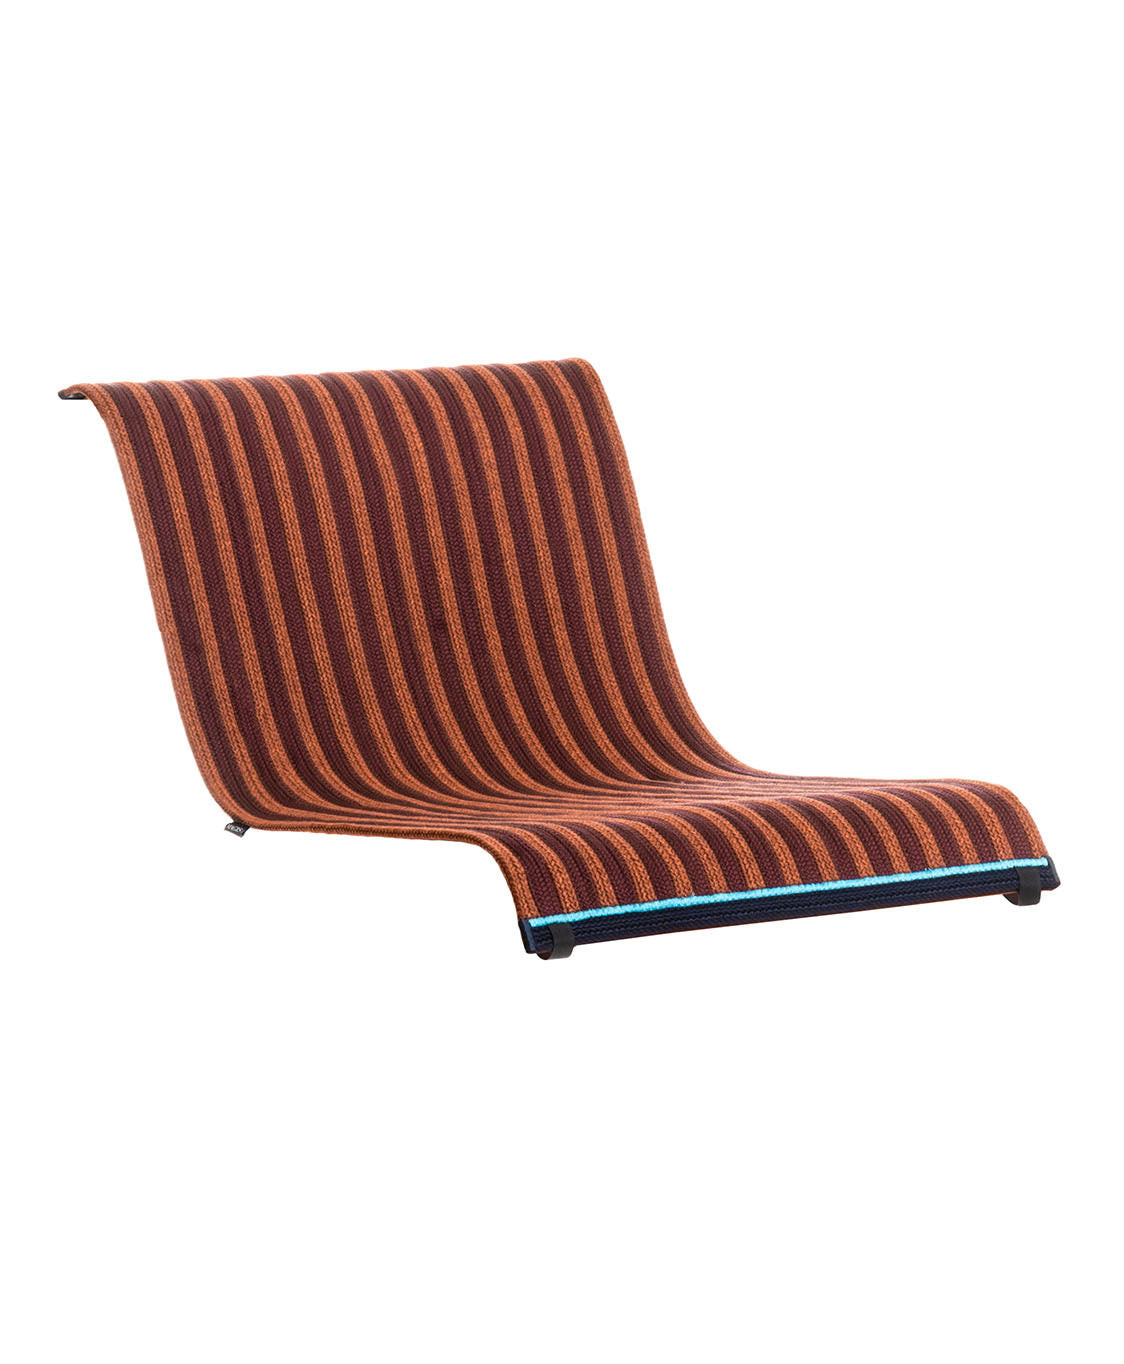 Magis South low armchair outdoor